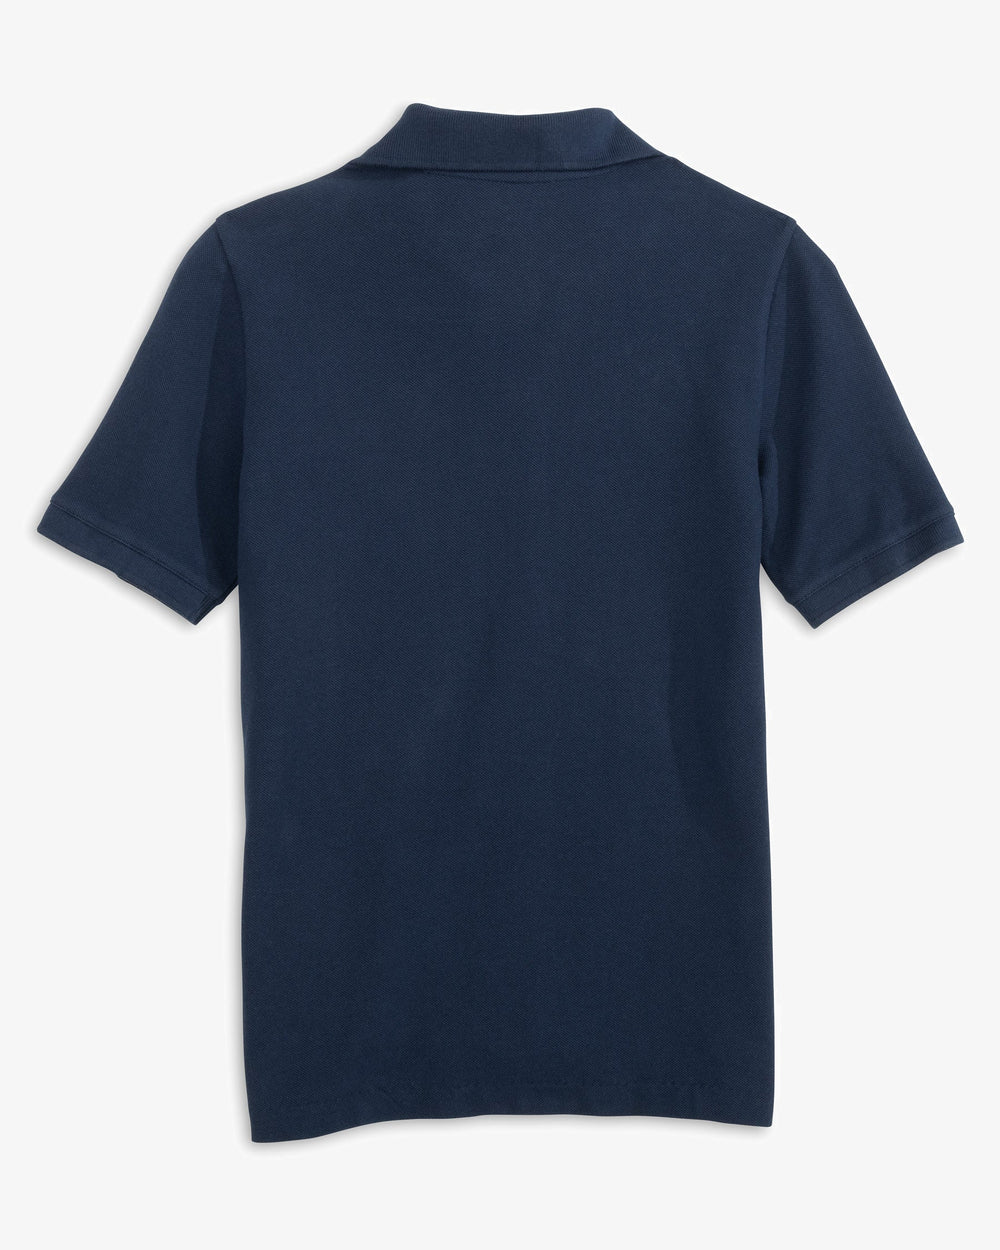 The back view of the Boys Skipjack Polo by Southern Tide - True Navy